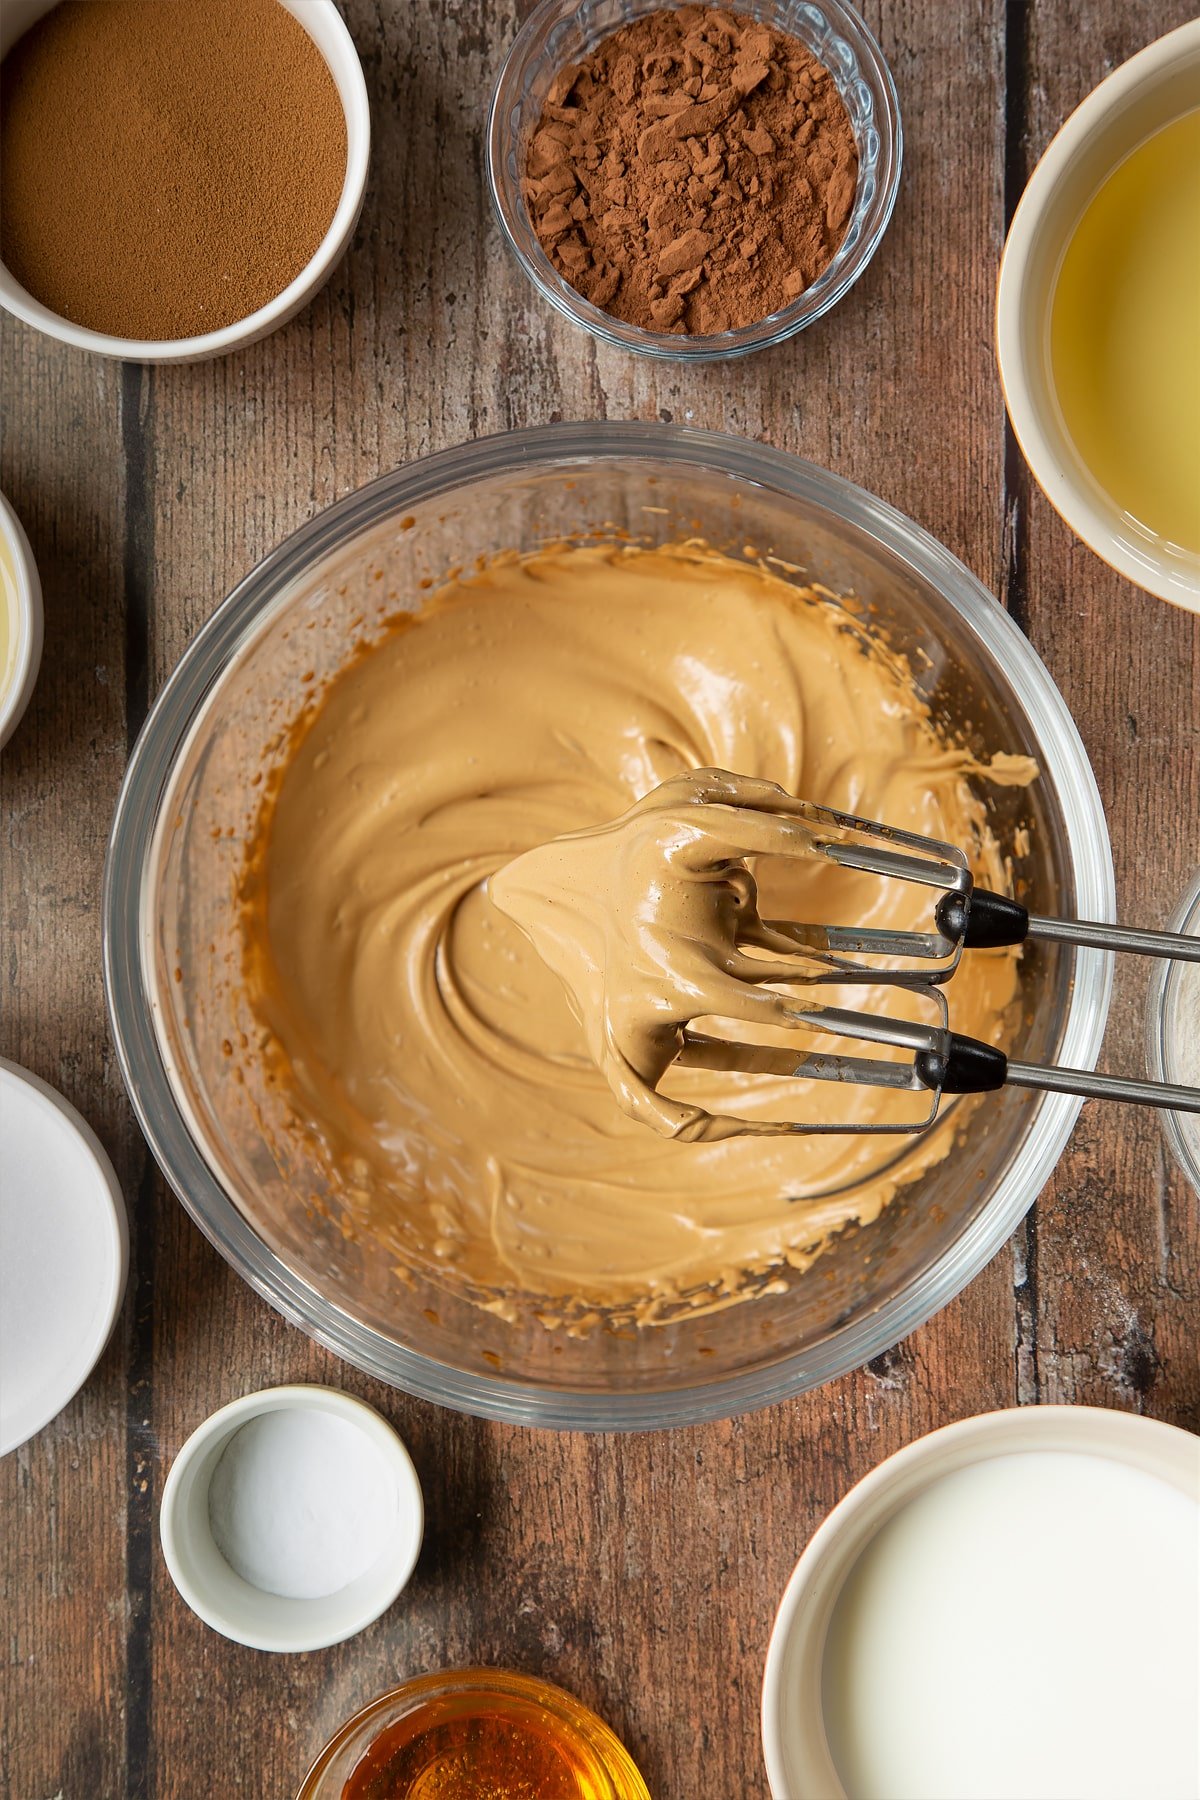 Sugar, instant coffee and hot water whisked together in a glass mixing bowl to create pale, creamy peaks which are shown on the ends of whisk beaters. Surrounding the bowl is ingredients to make dalgona coffee cake.